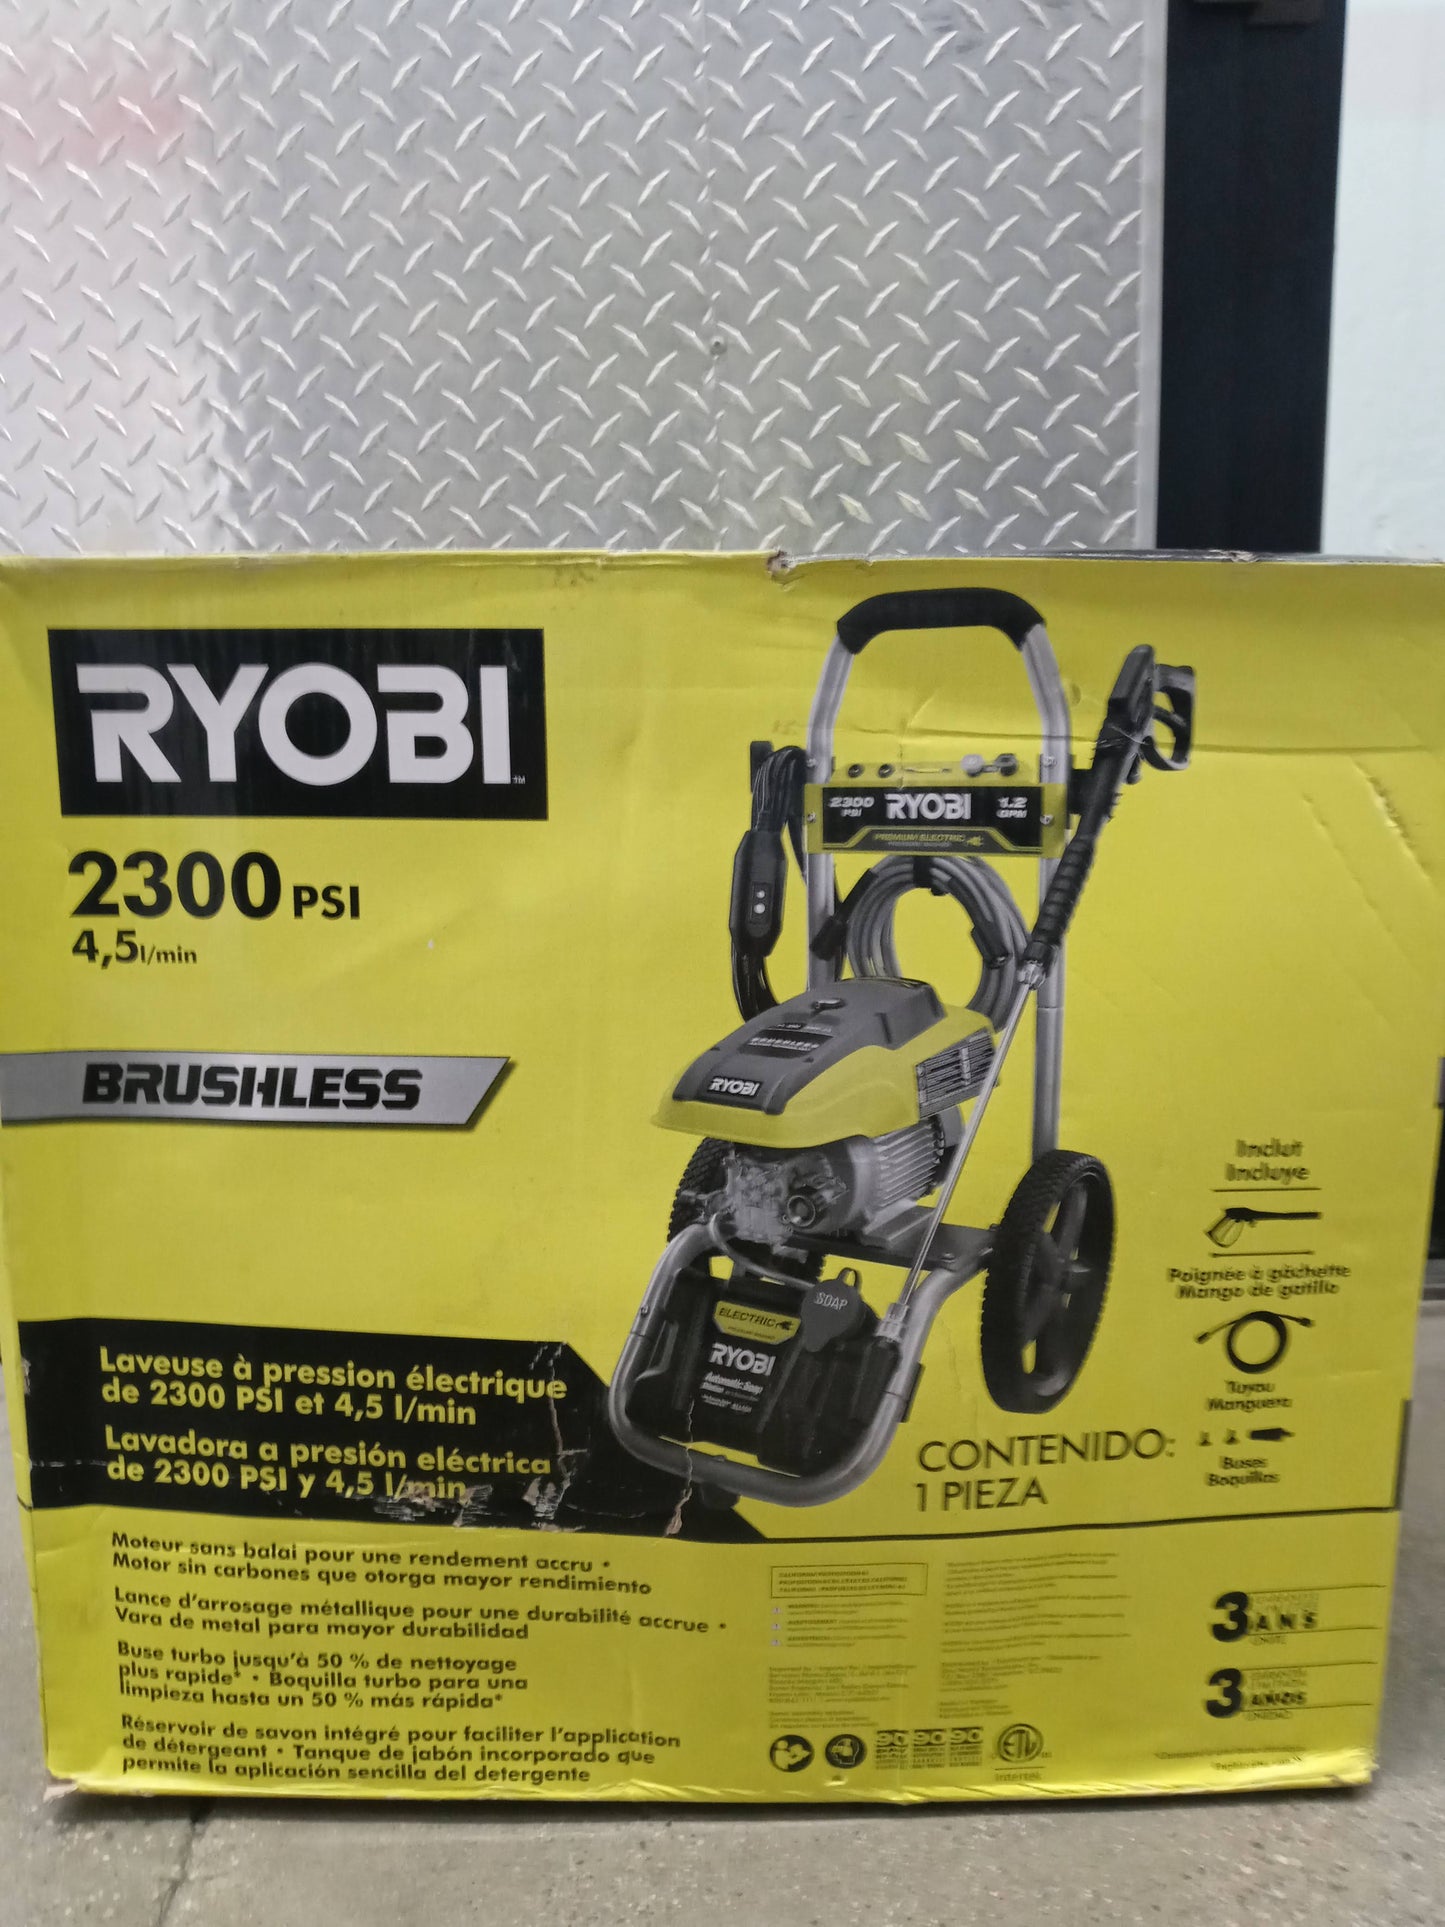 Ryobi 2300 Psi Pressure Washer  1.2 GPM - Electric Cold Water Pressure Washer  Brushless  Open Box -